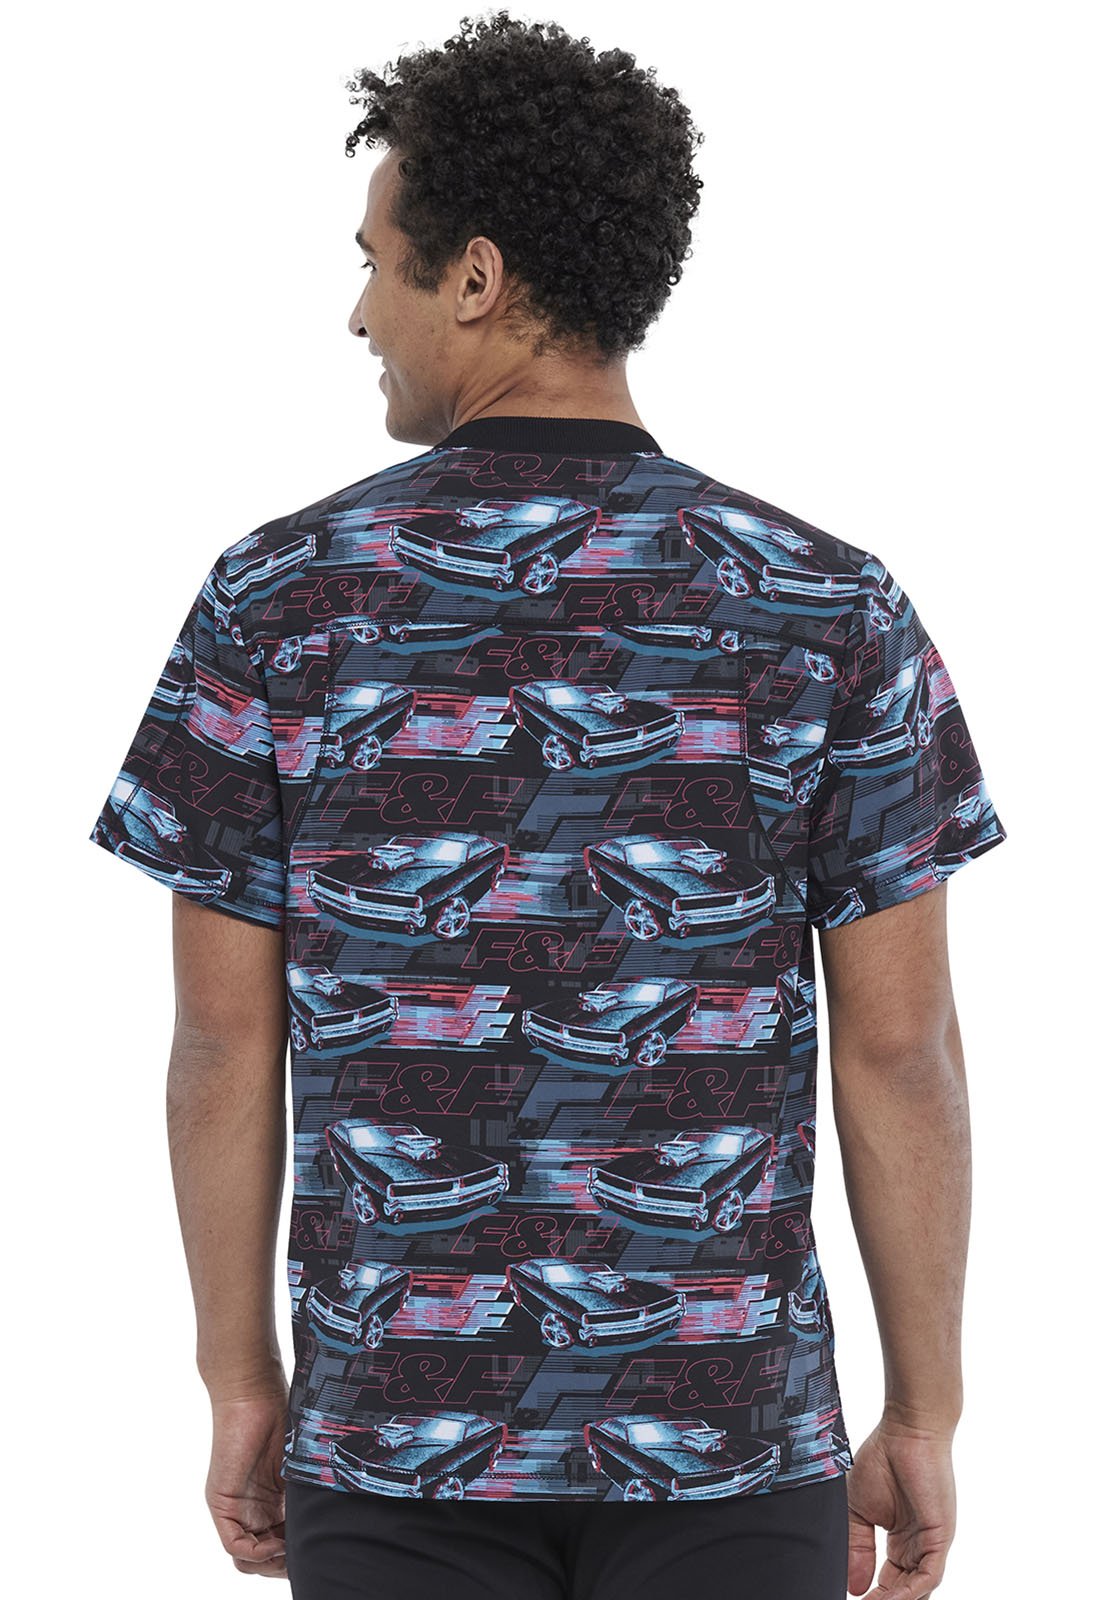 Fast And Furious Tooniforms Licensed Men's V Neck Scrub Top TF730 TFFF - Scrubs Select